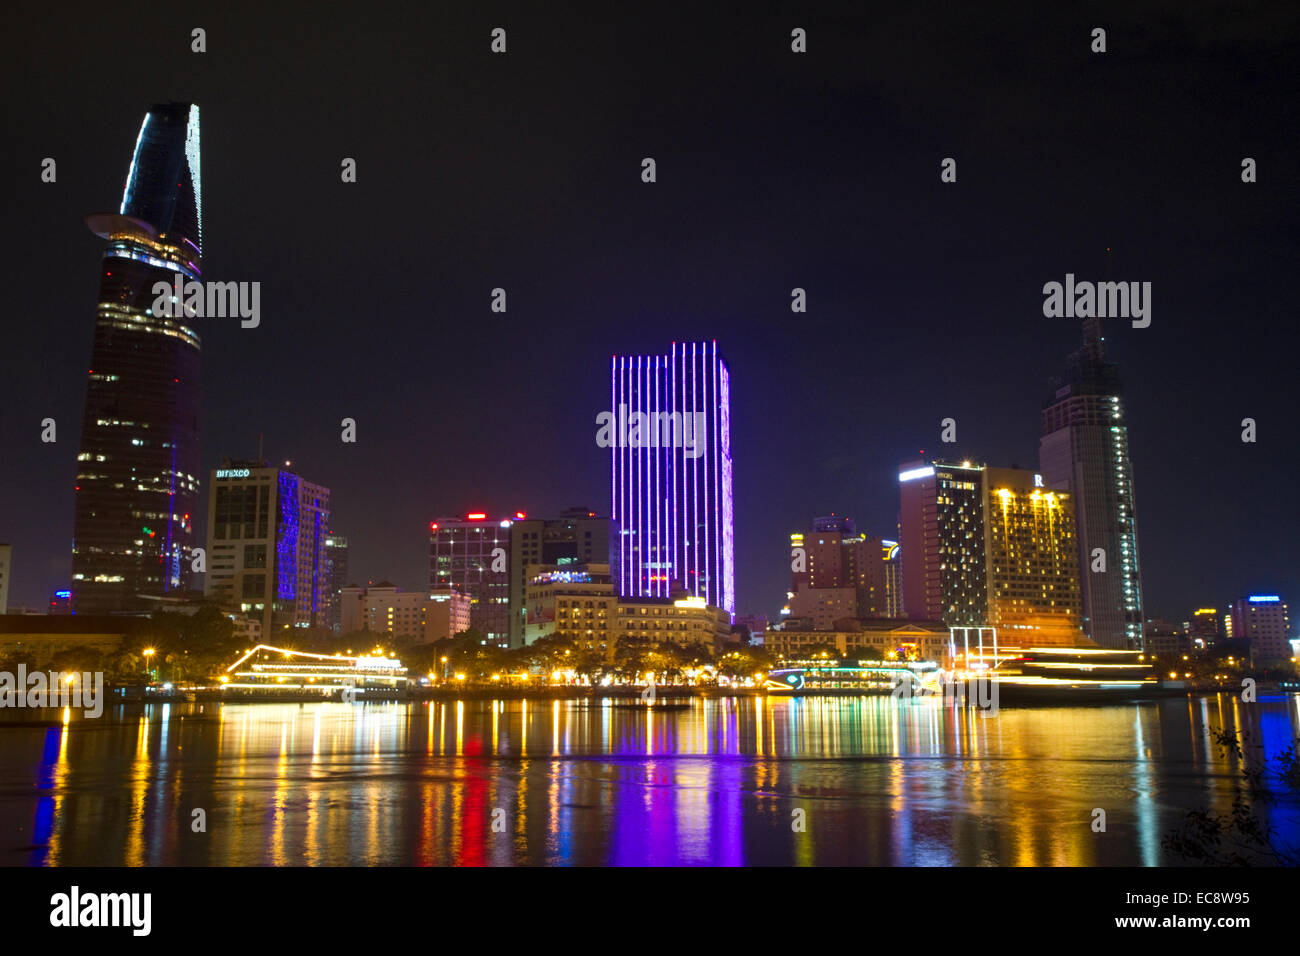 Night view of city lights reflected on the Saigon River in Ho Chi Minh City, Vietnam. Stock Photo